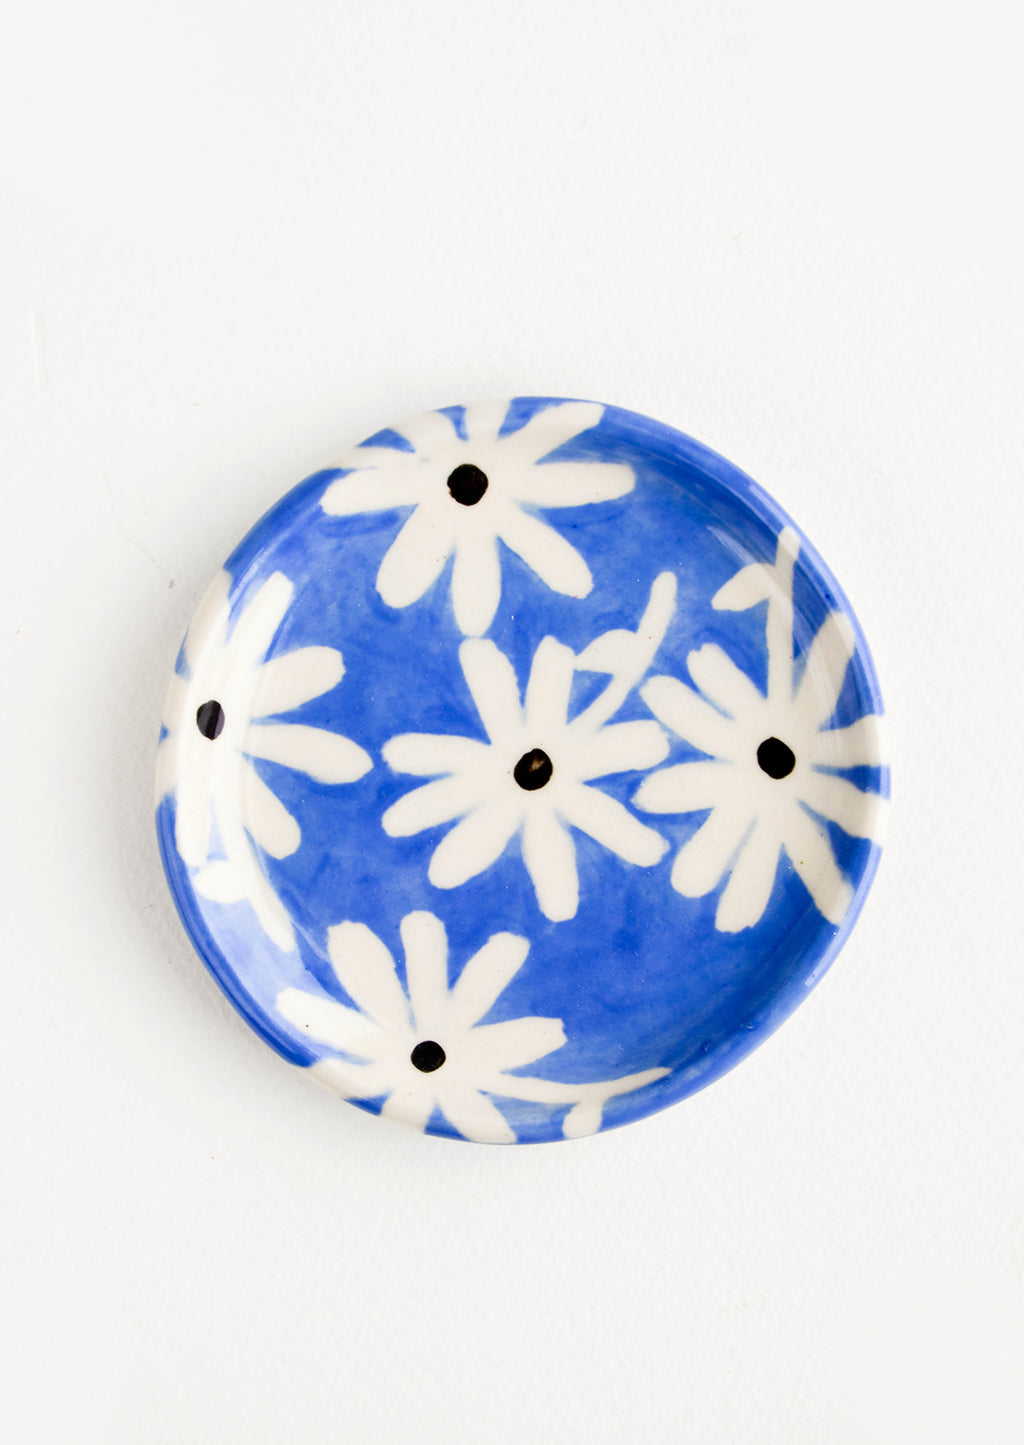 Blue Daisy: Small, round ceramic dish in blue with black and white daisies